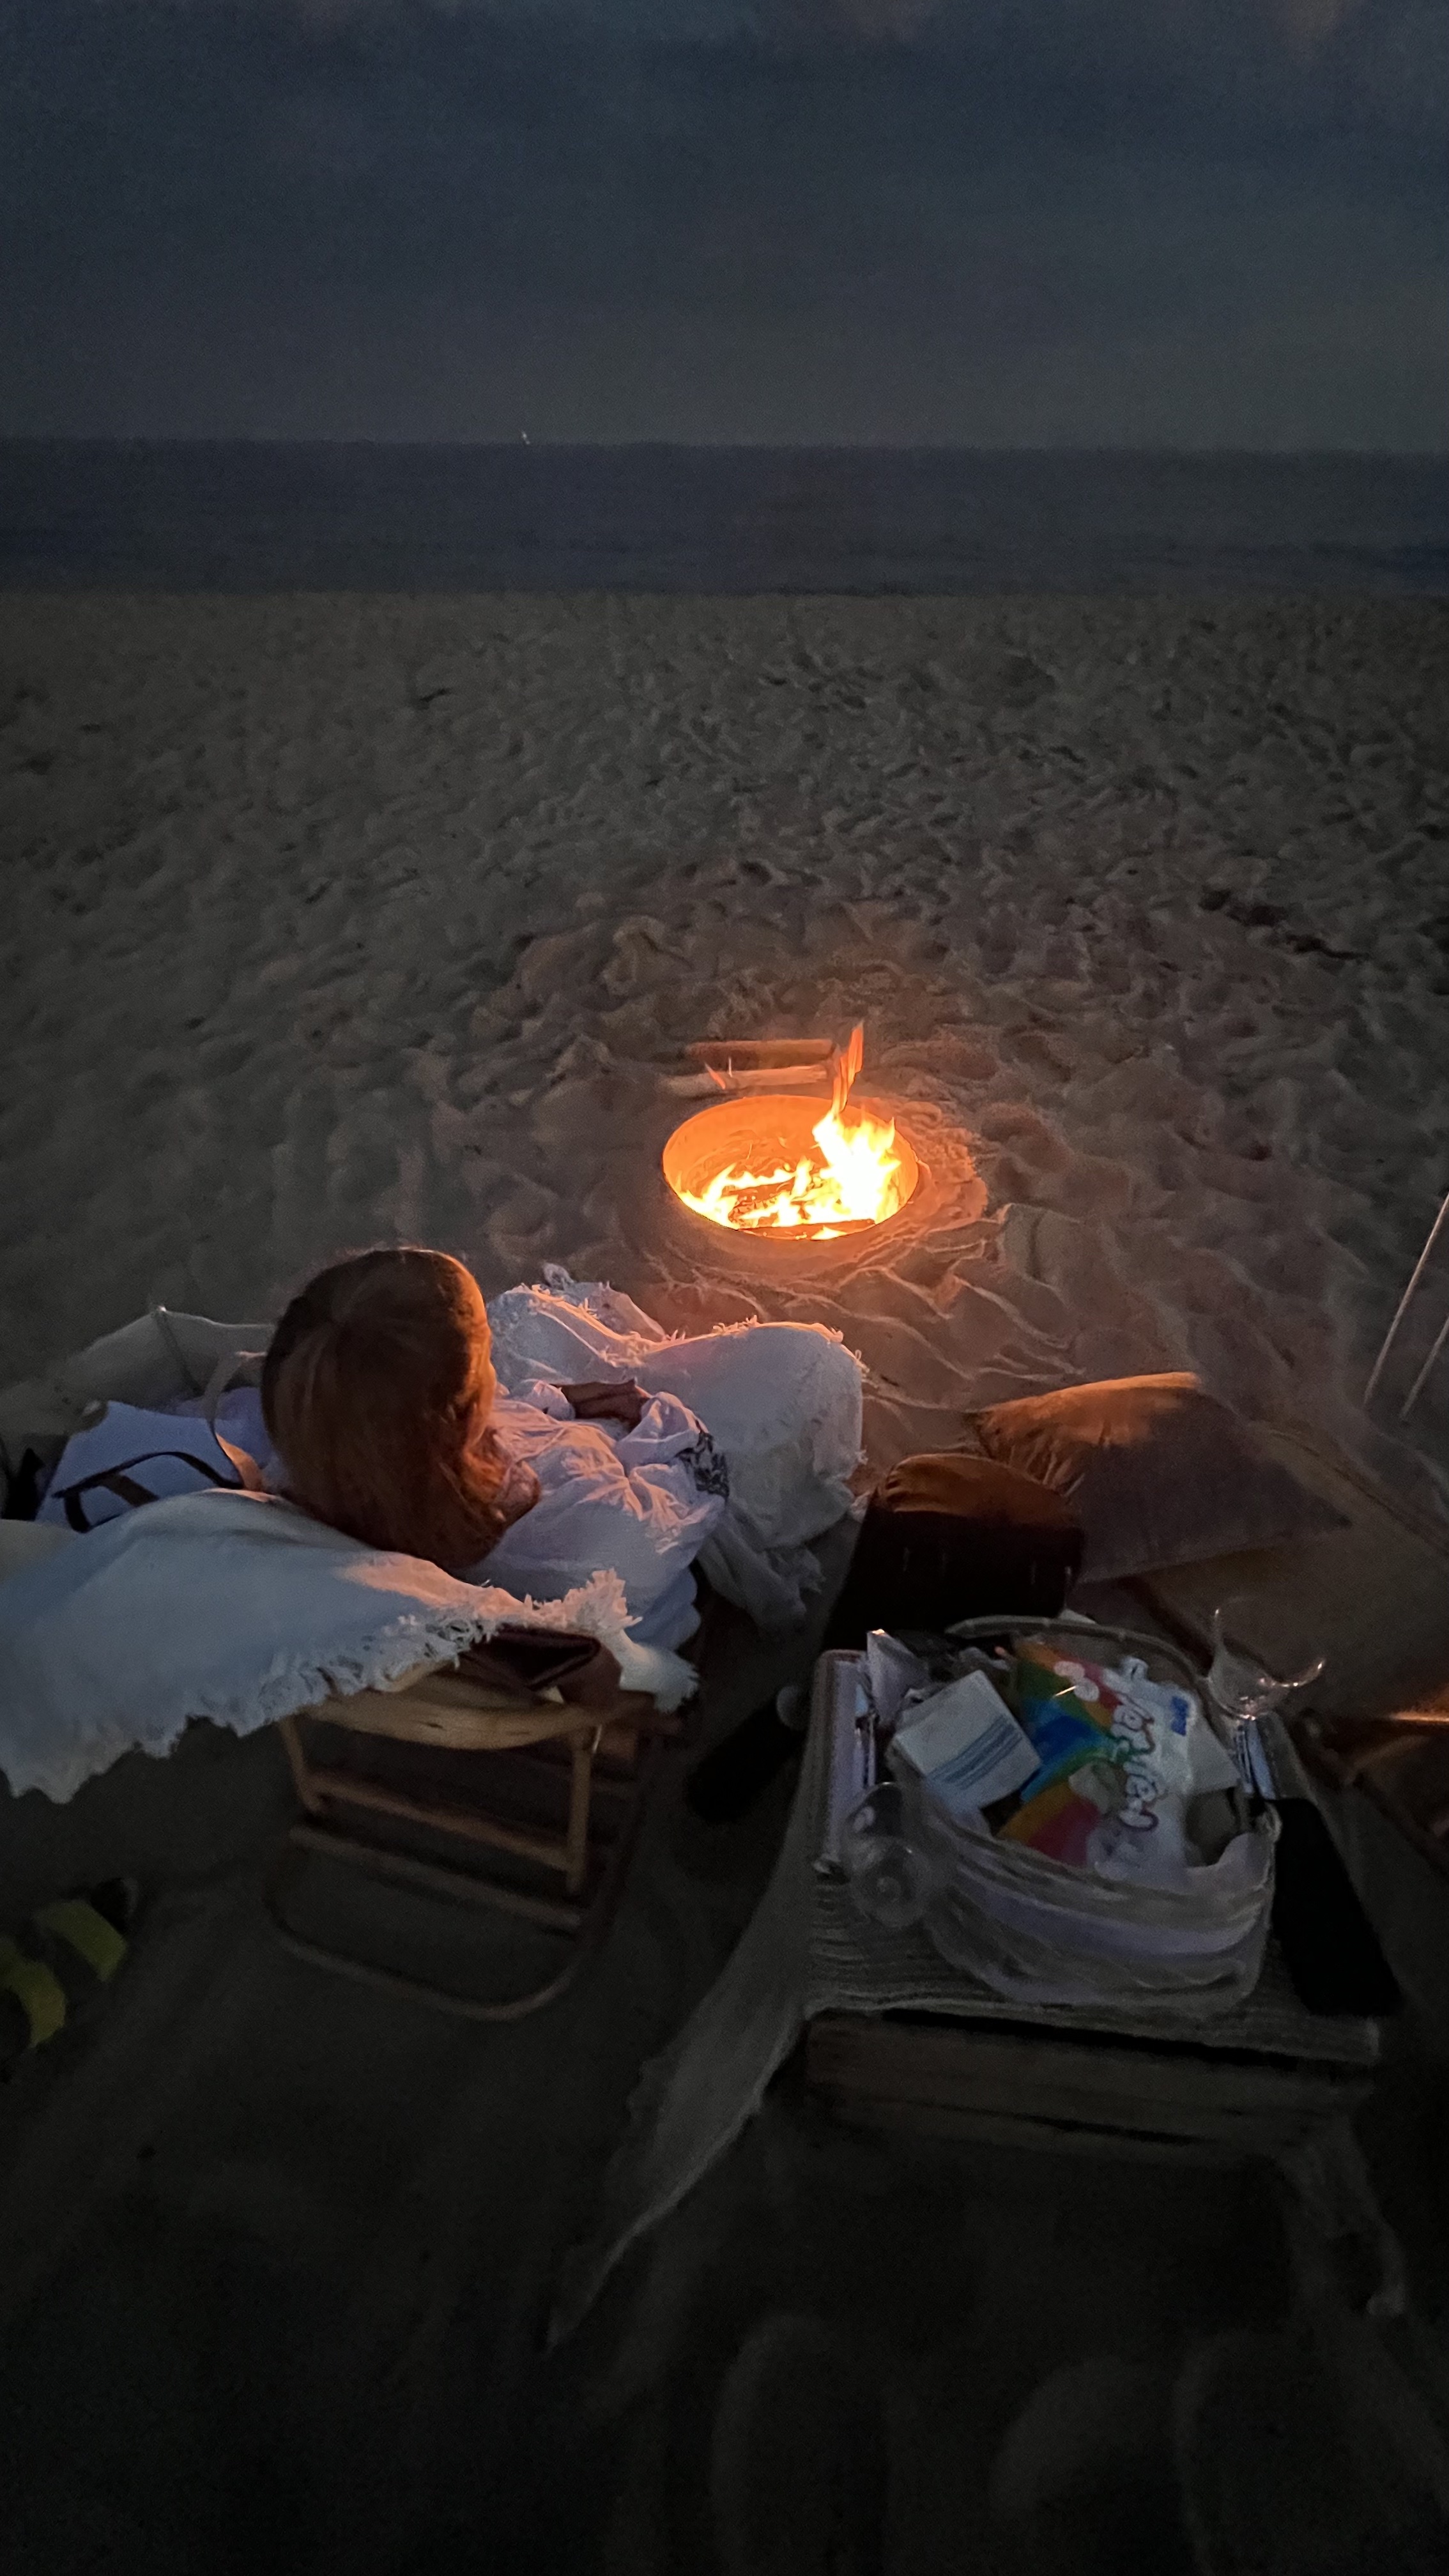 s'mores night at the beach